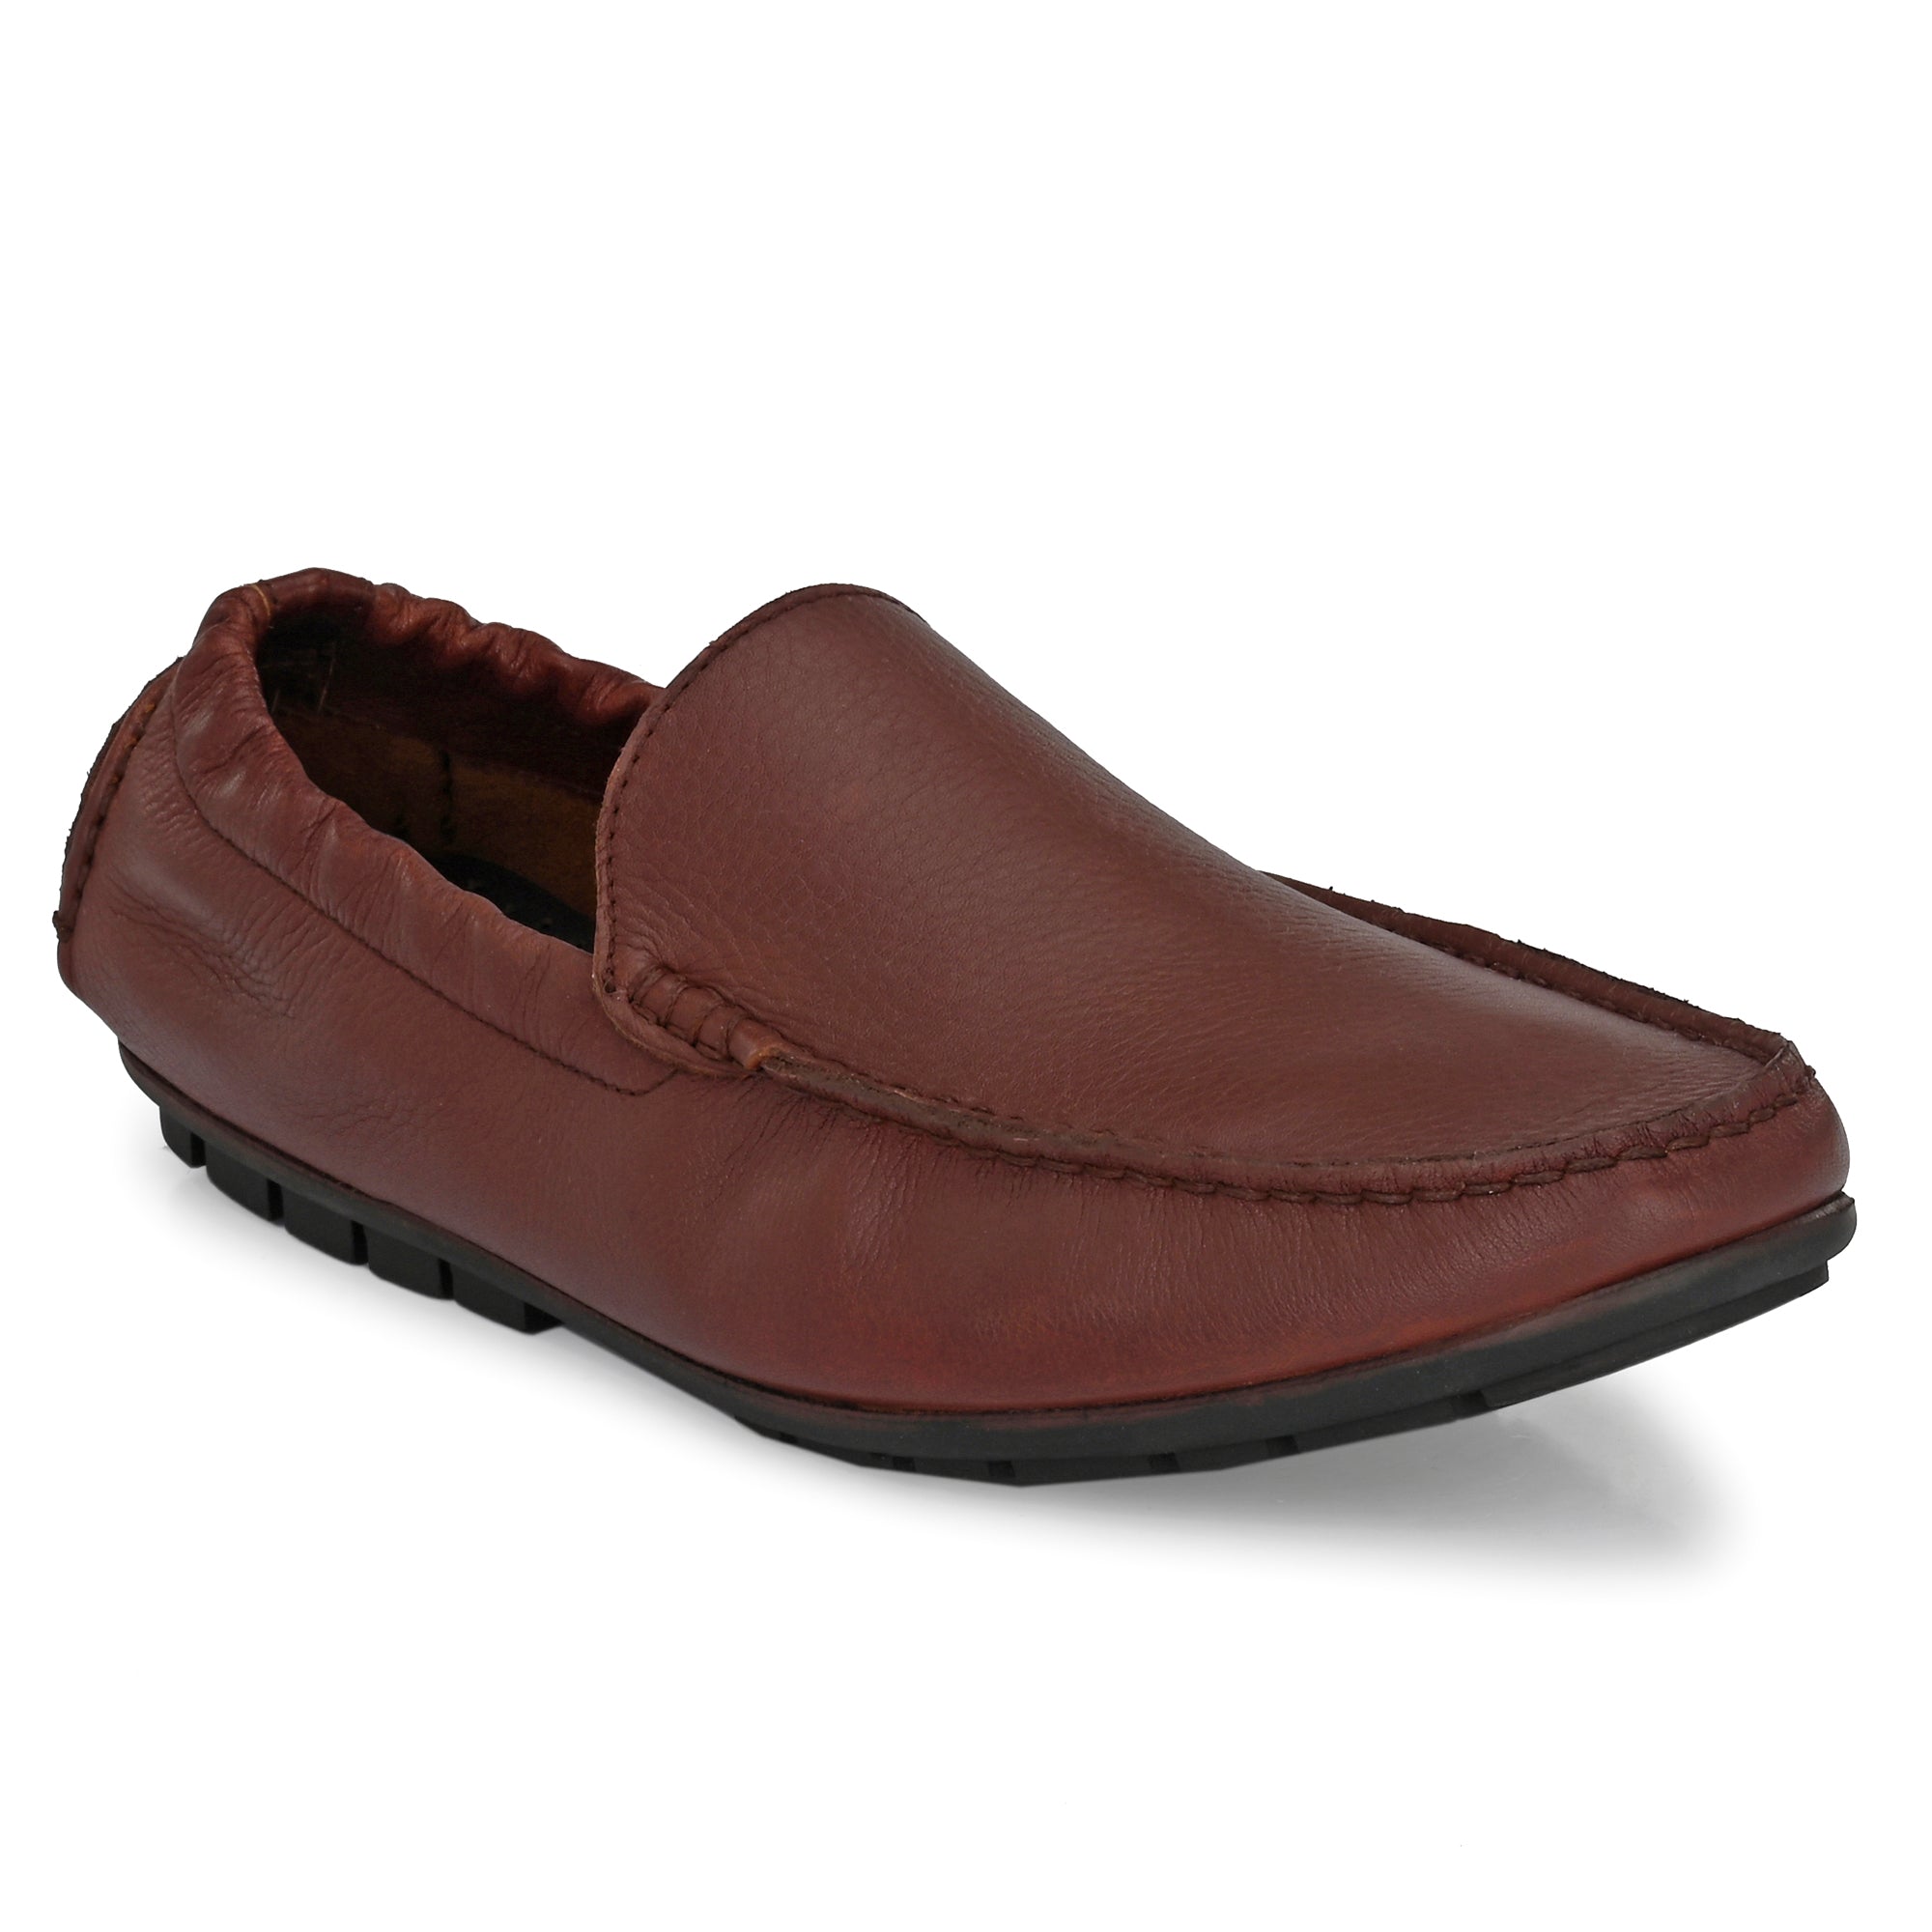 Egoss - The Ultimate Leather Socks Loafers For Men